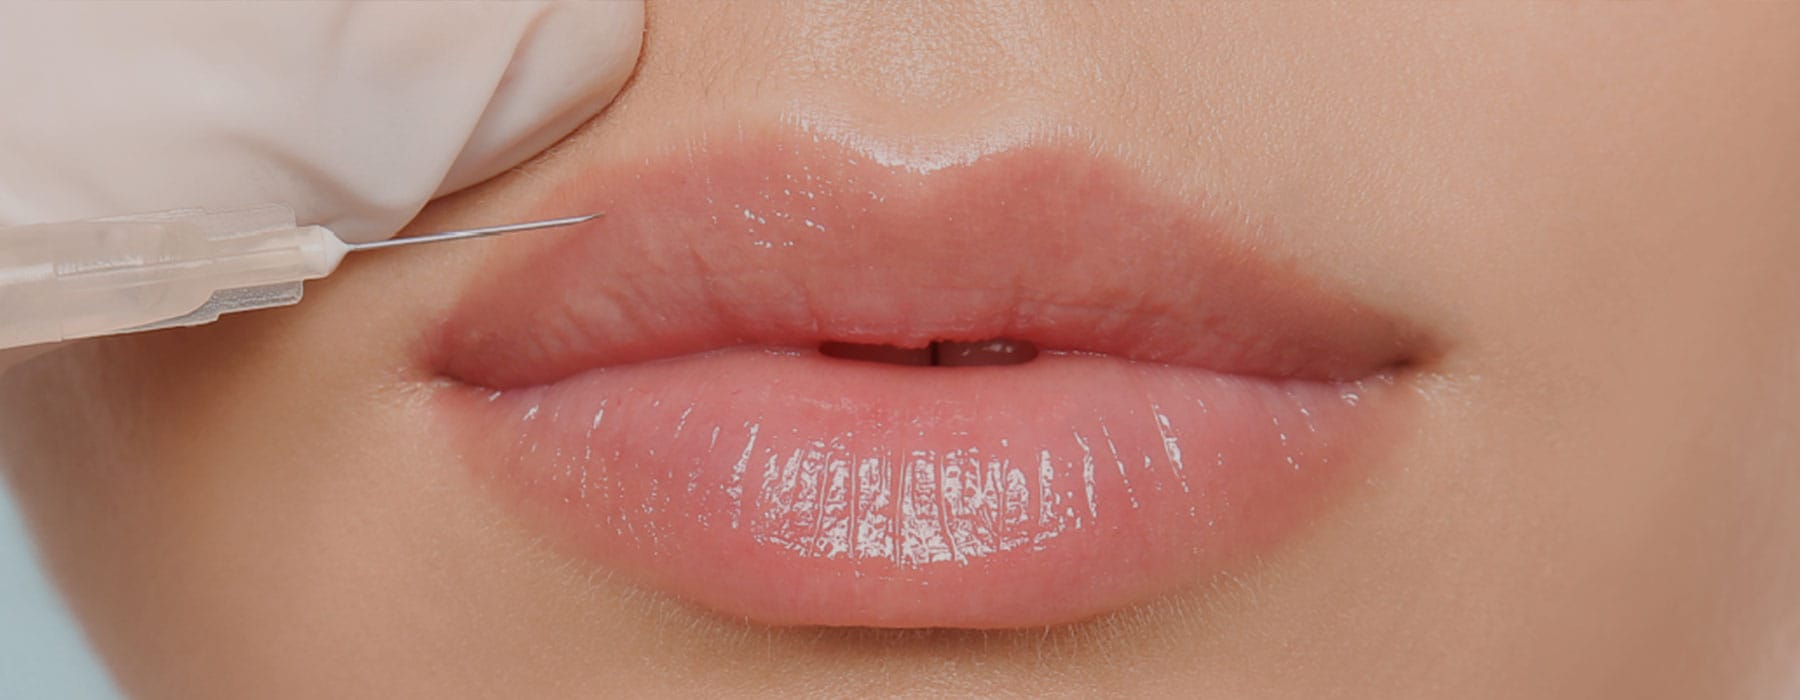 Lip Fillers Aren’t Just for Plumping